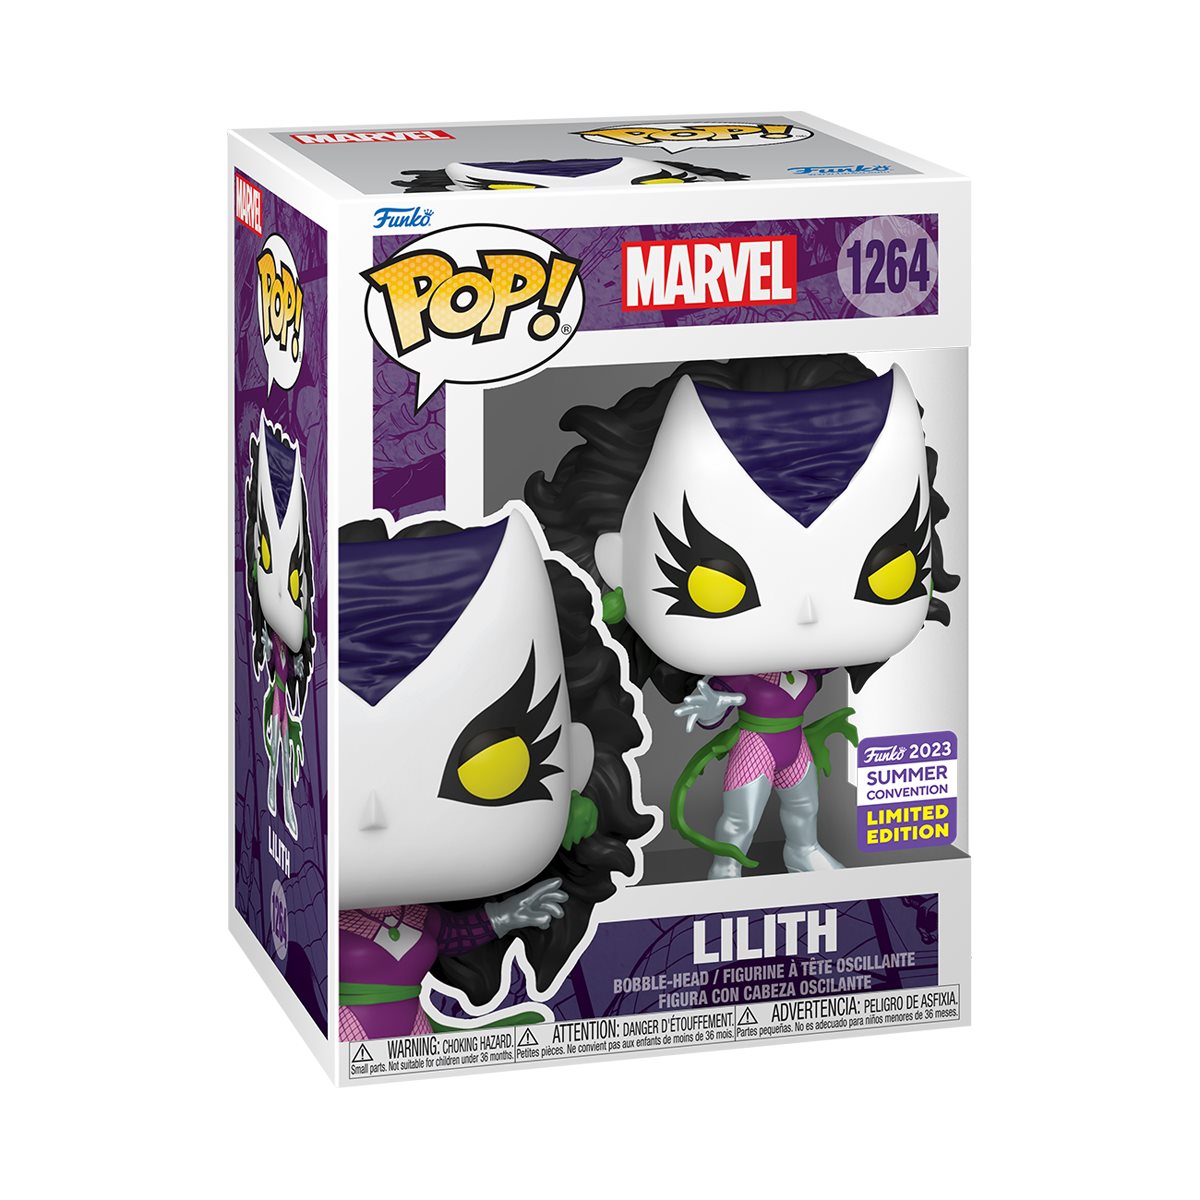 Marvel Lilith Funko Pop! Vinyl Figure #1264 - 2023 Convention Exclusive in a box - Heretoserveyou